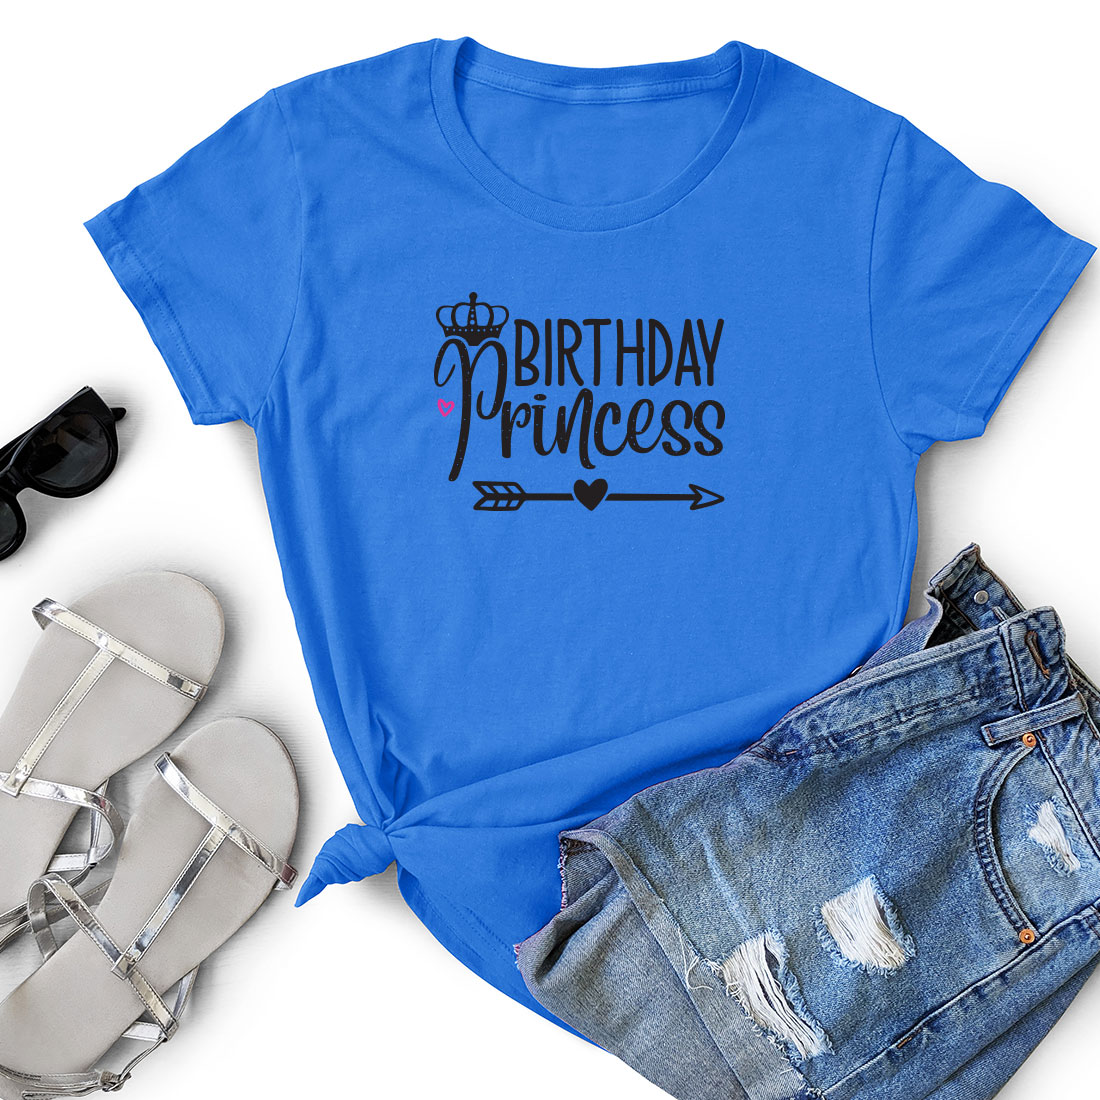 Blue shirt with the words birthday princess on it.